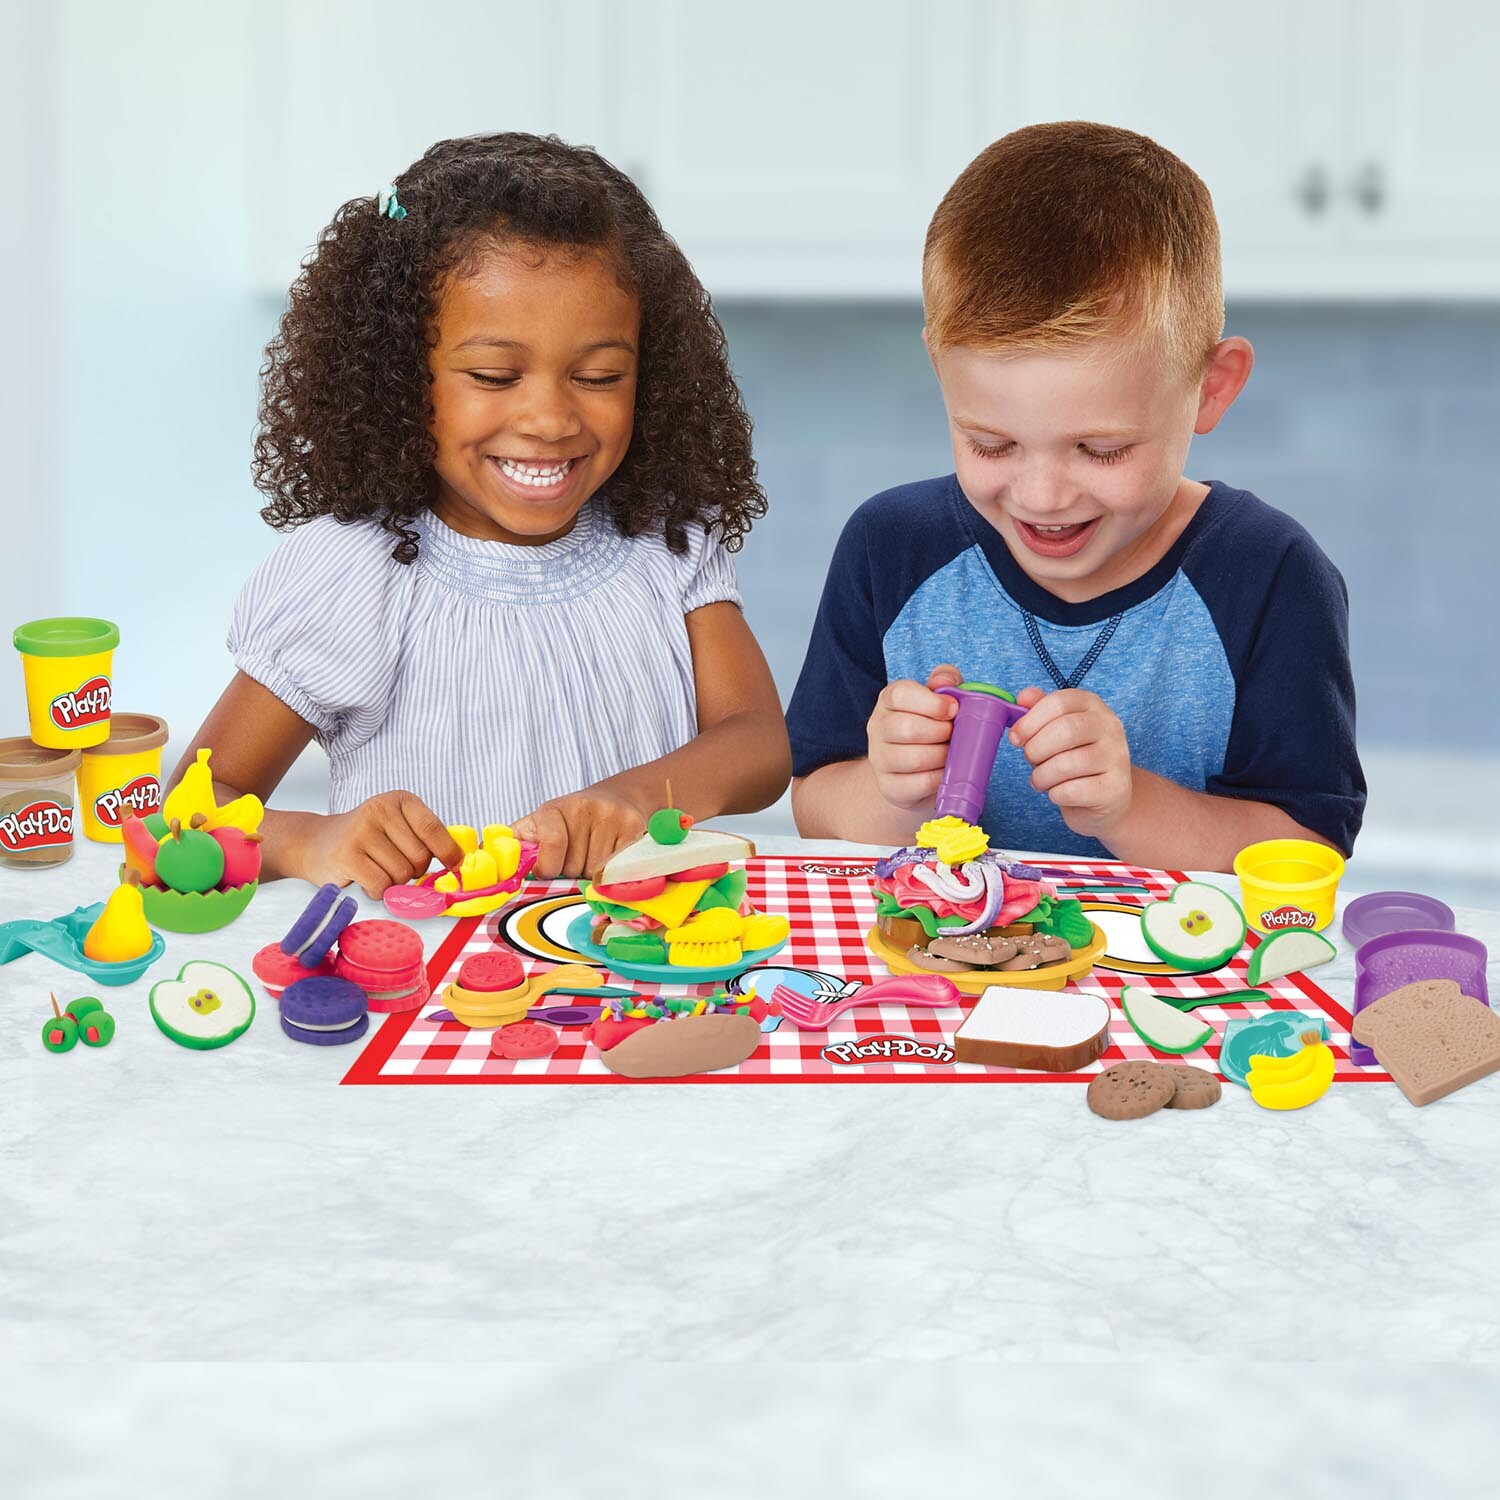 Play-Doh Giftable Playset Image 8